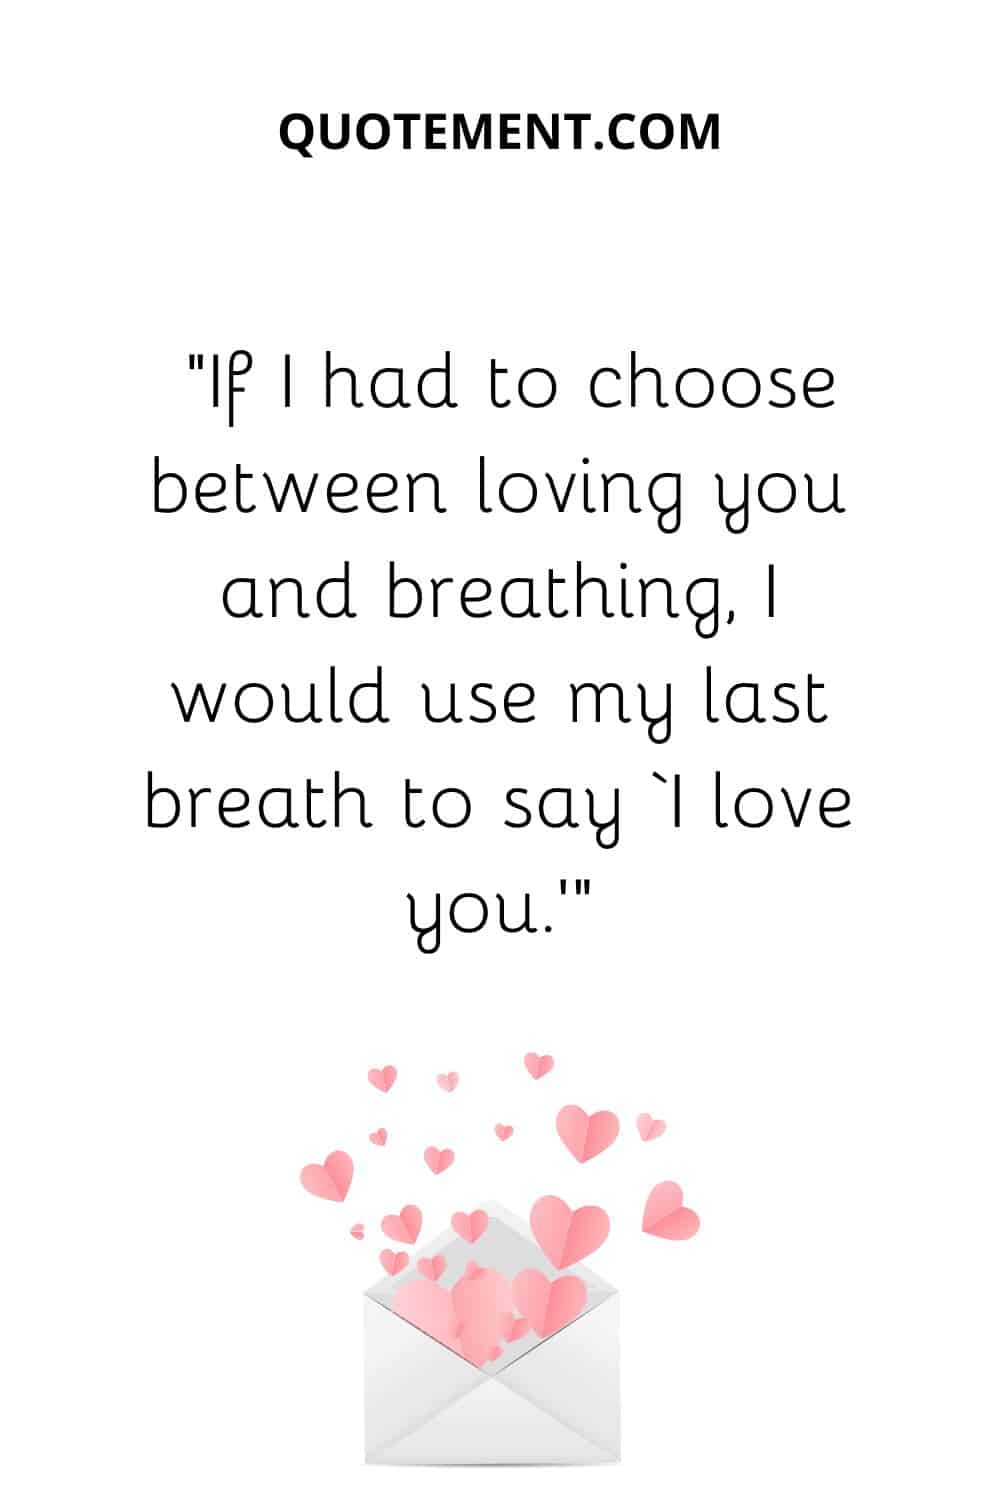 “If I had to choose between loving you and breathing, I would use my last breath to say ‘I love you.’”